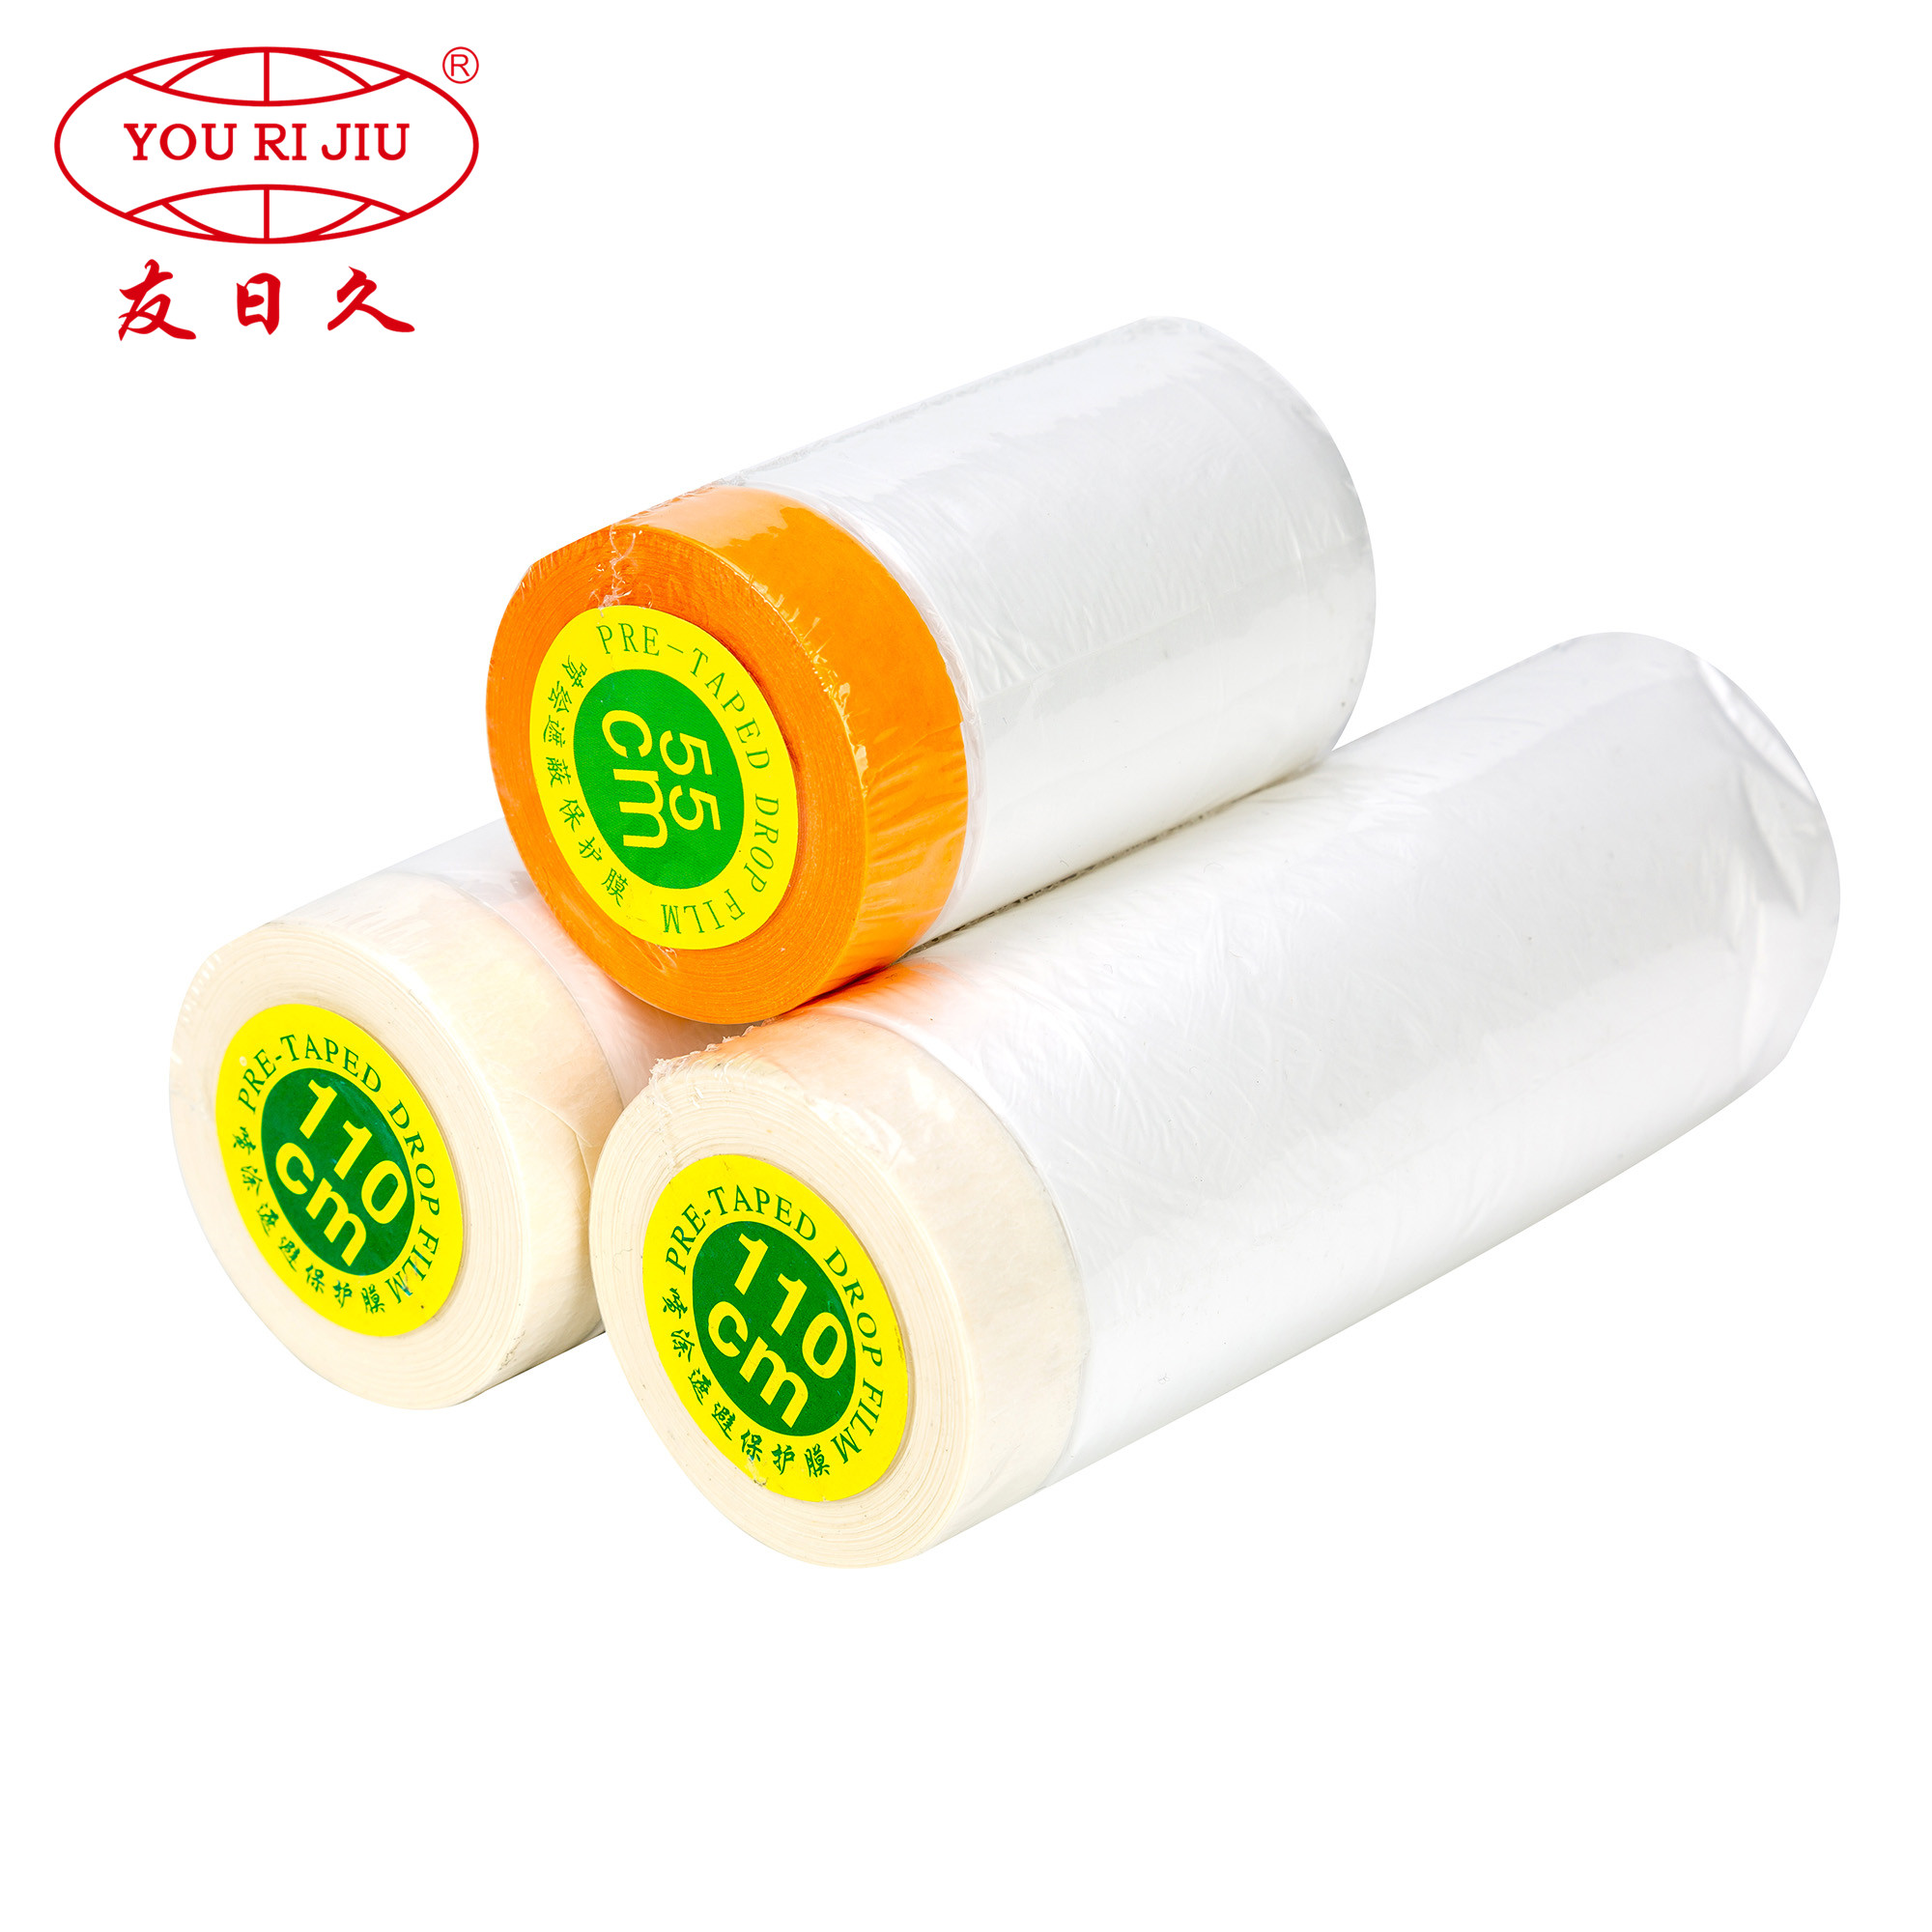 Yourijiu customized Masking Film Tape with good price for painting-1